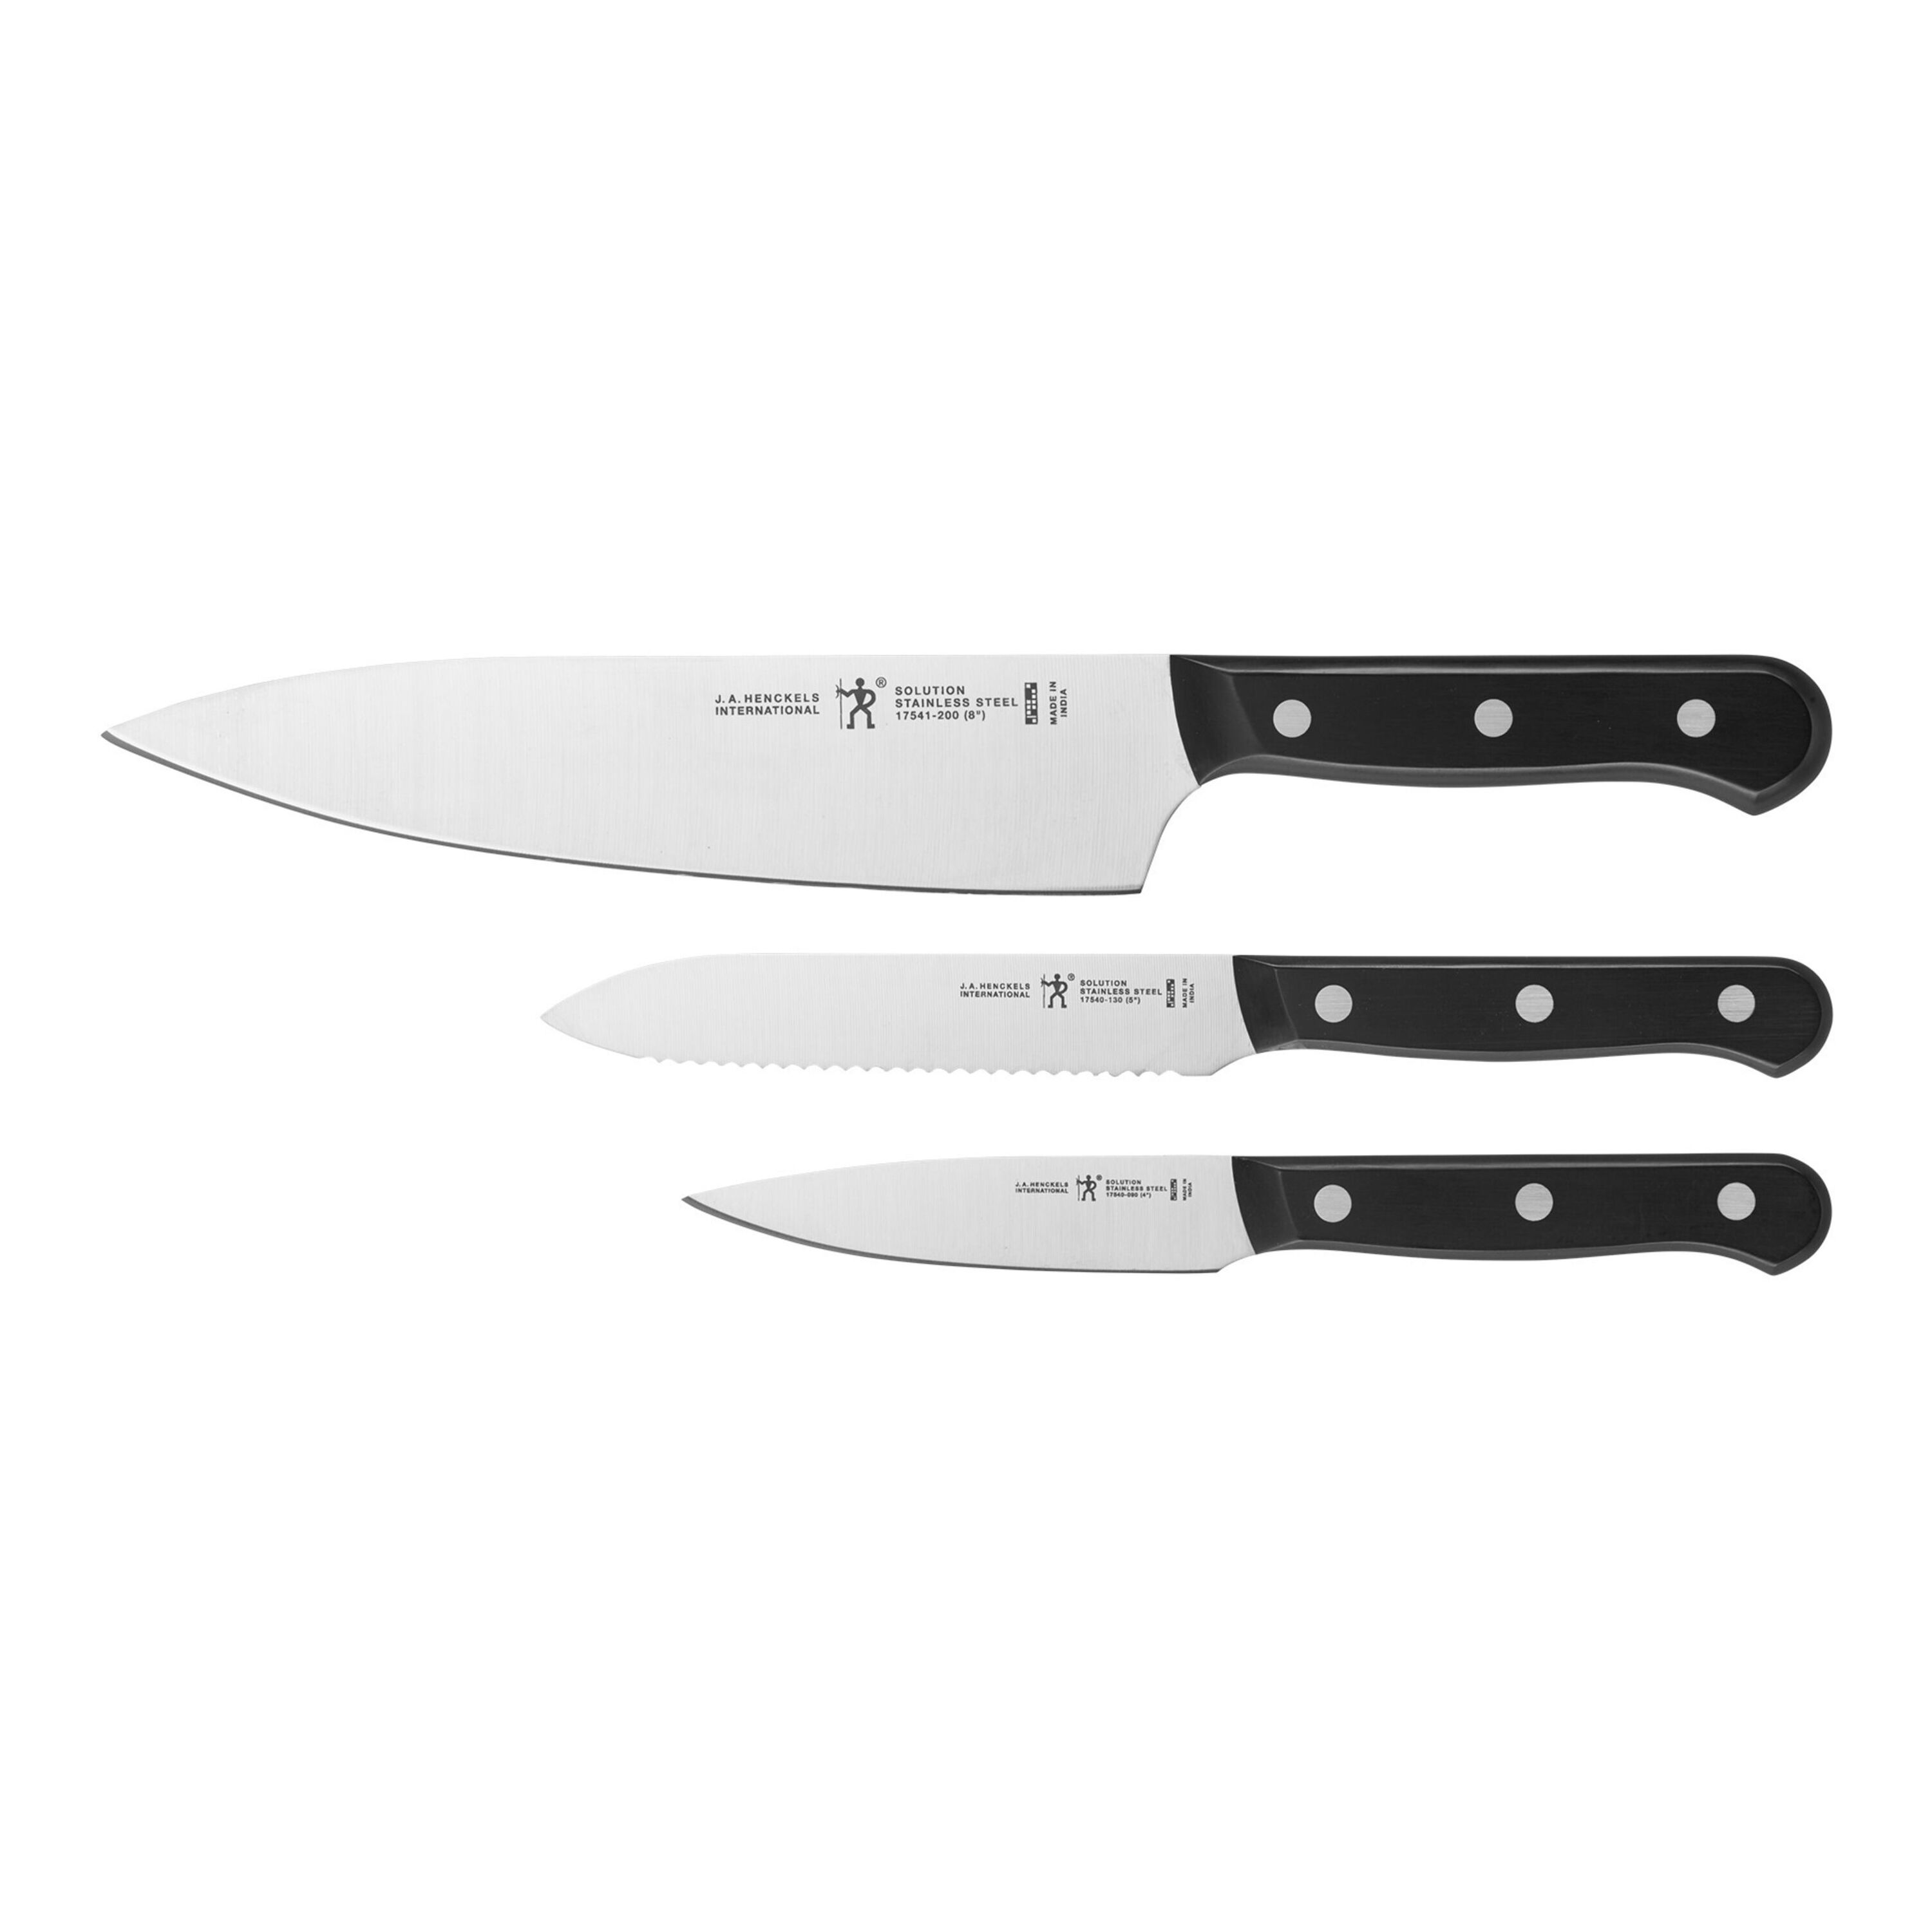 MASTER Chef Stainless Steel Knife Set with Sheaths, Dishwasher